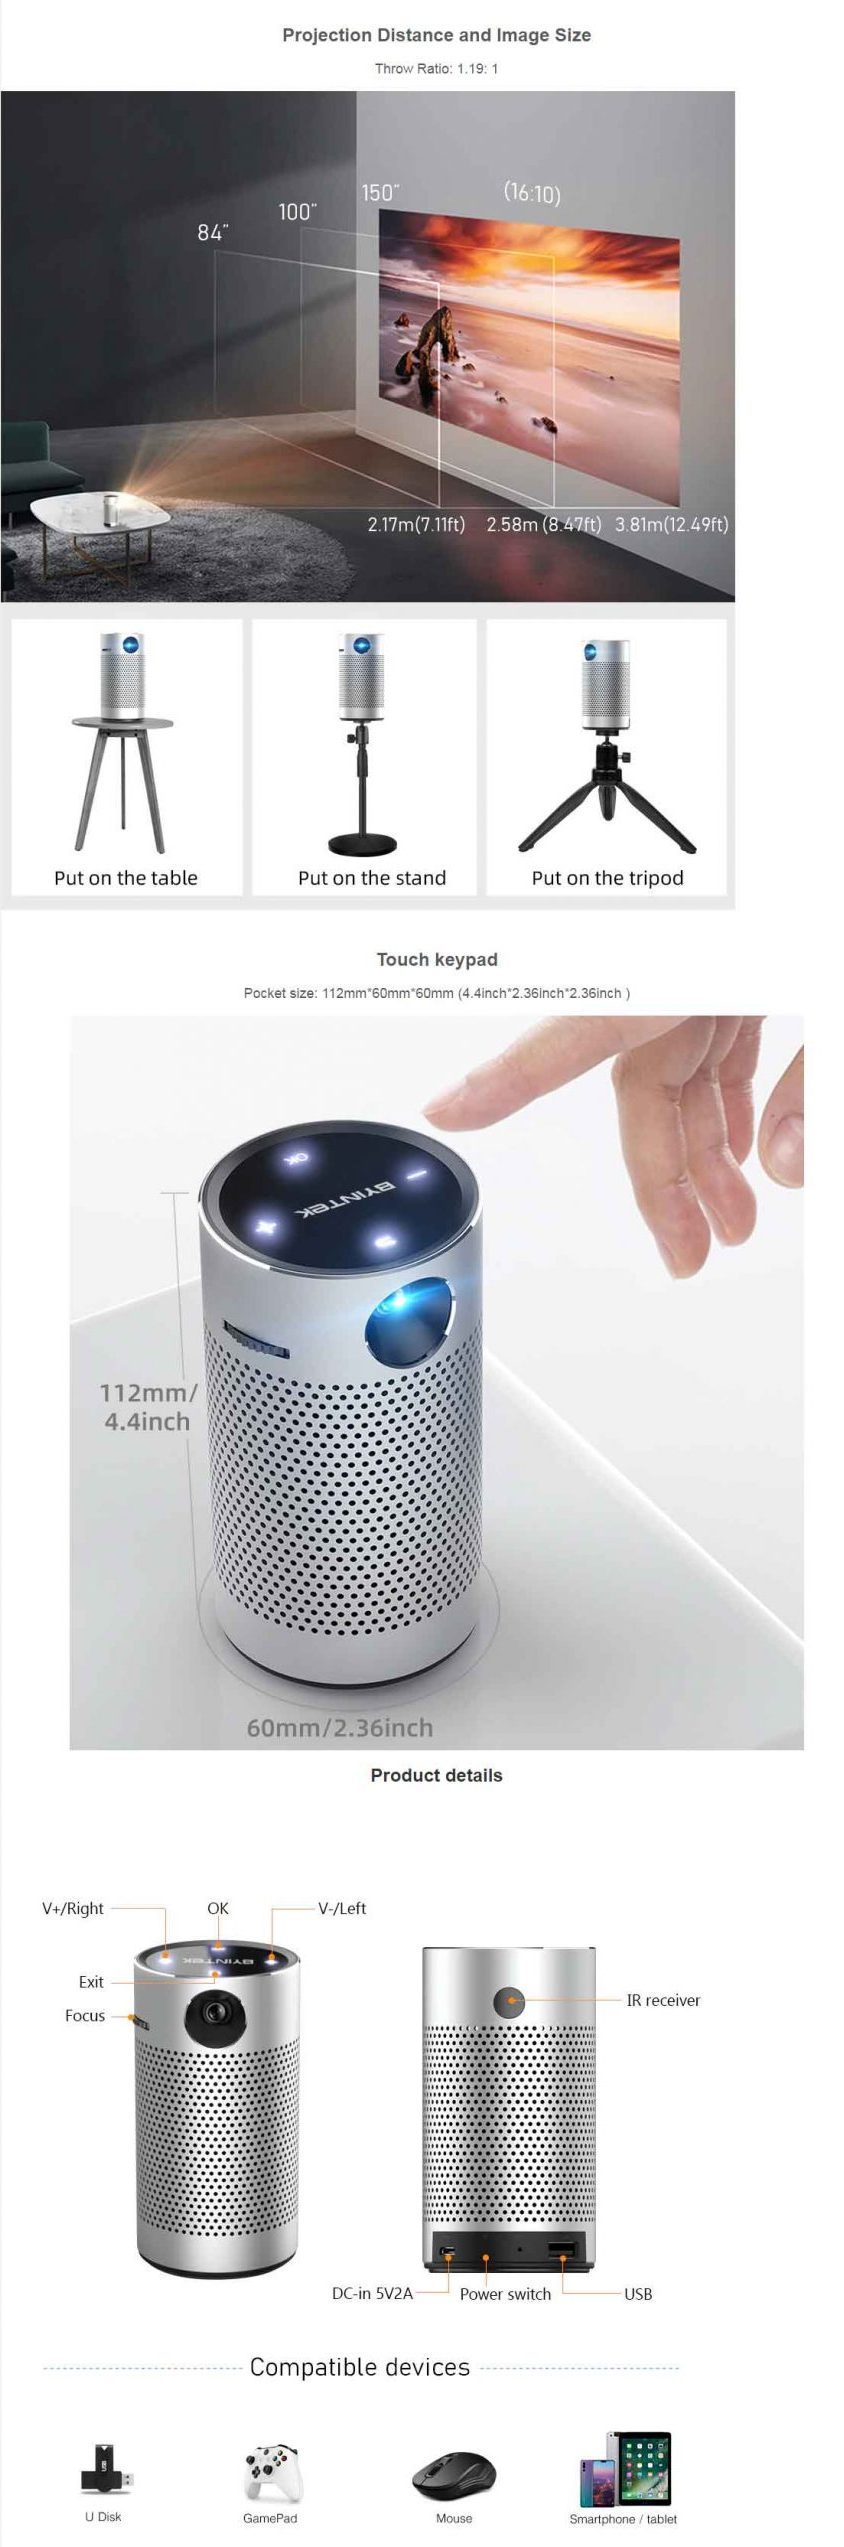 Byintek UFO P7 Android Projector - Portable Smart Home Theater Pocket Battery Projector